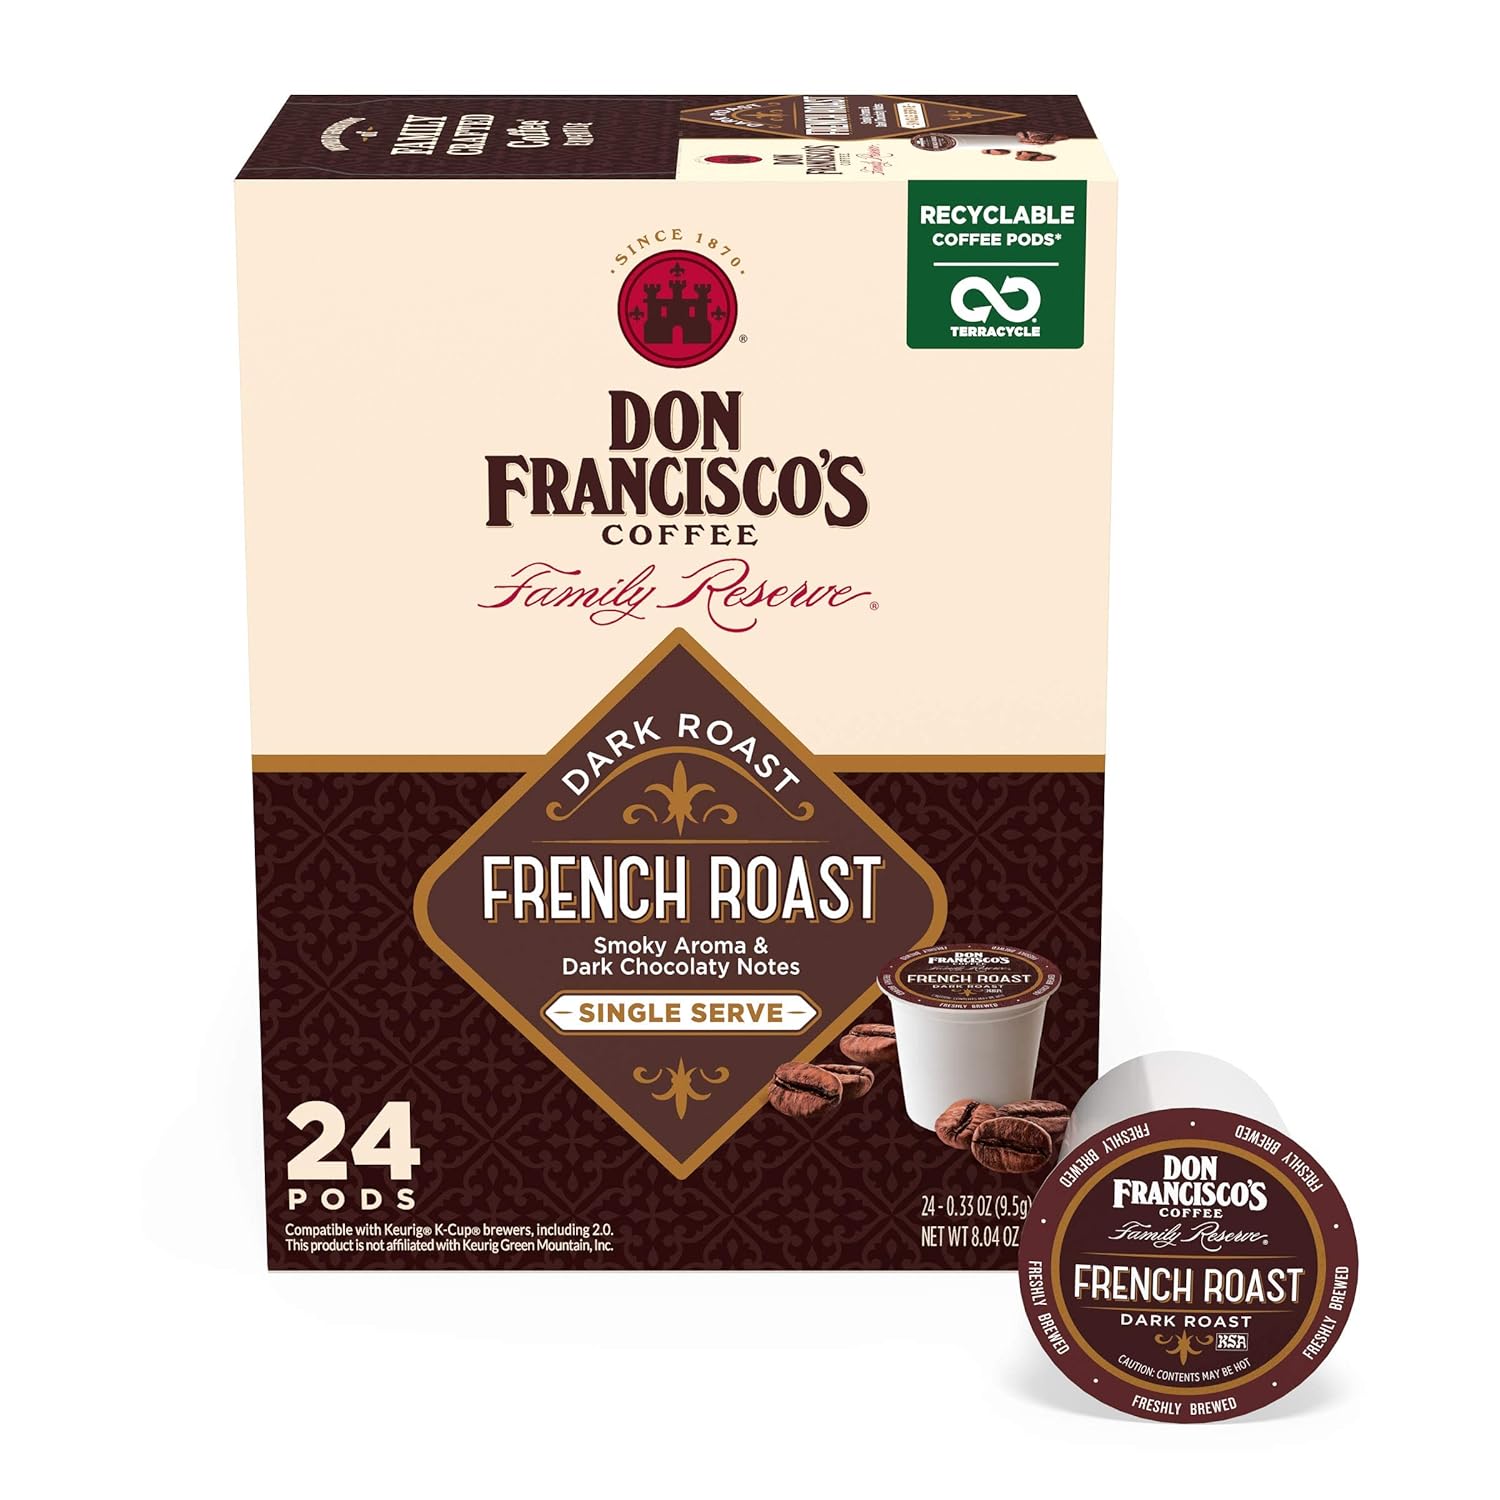 Don Francisco's French Dark Roast Coffee Pods - 24 Count - Recyclable Single-Serve Coffee Pods, Compatible with your K- Cup Keurig Coffee Maker